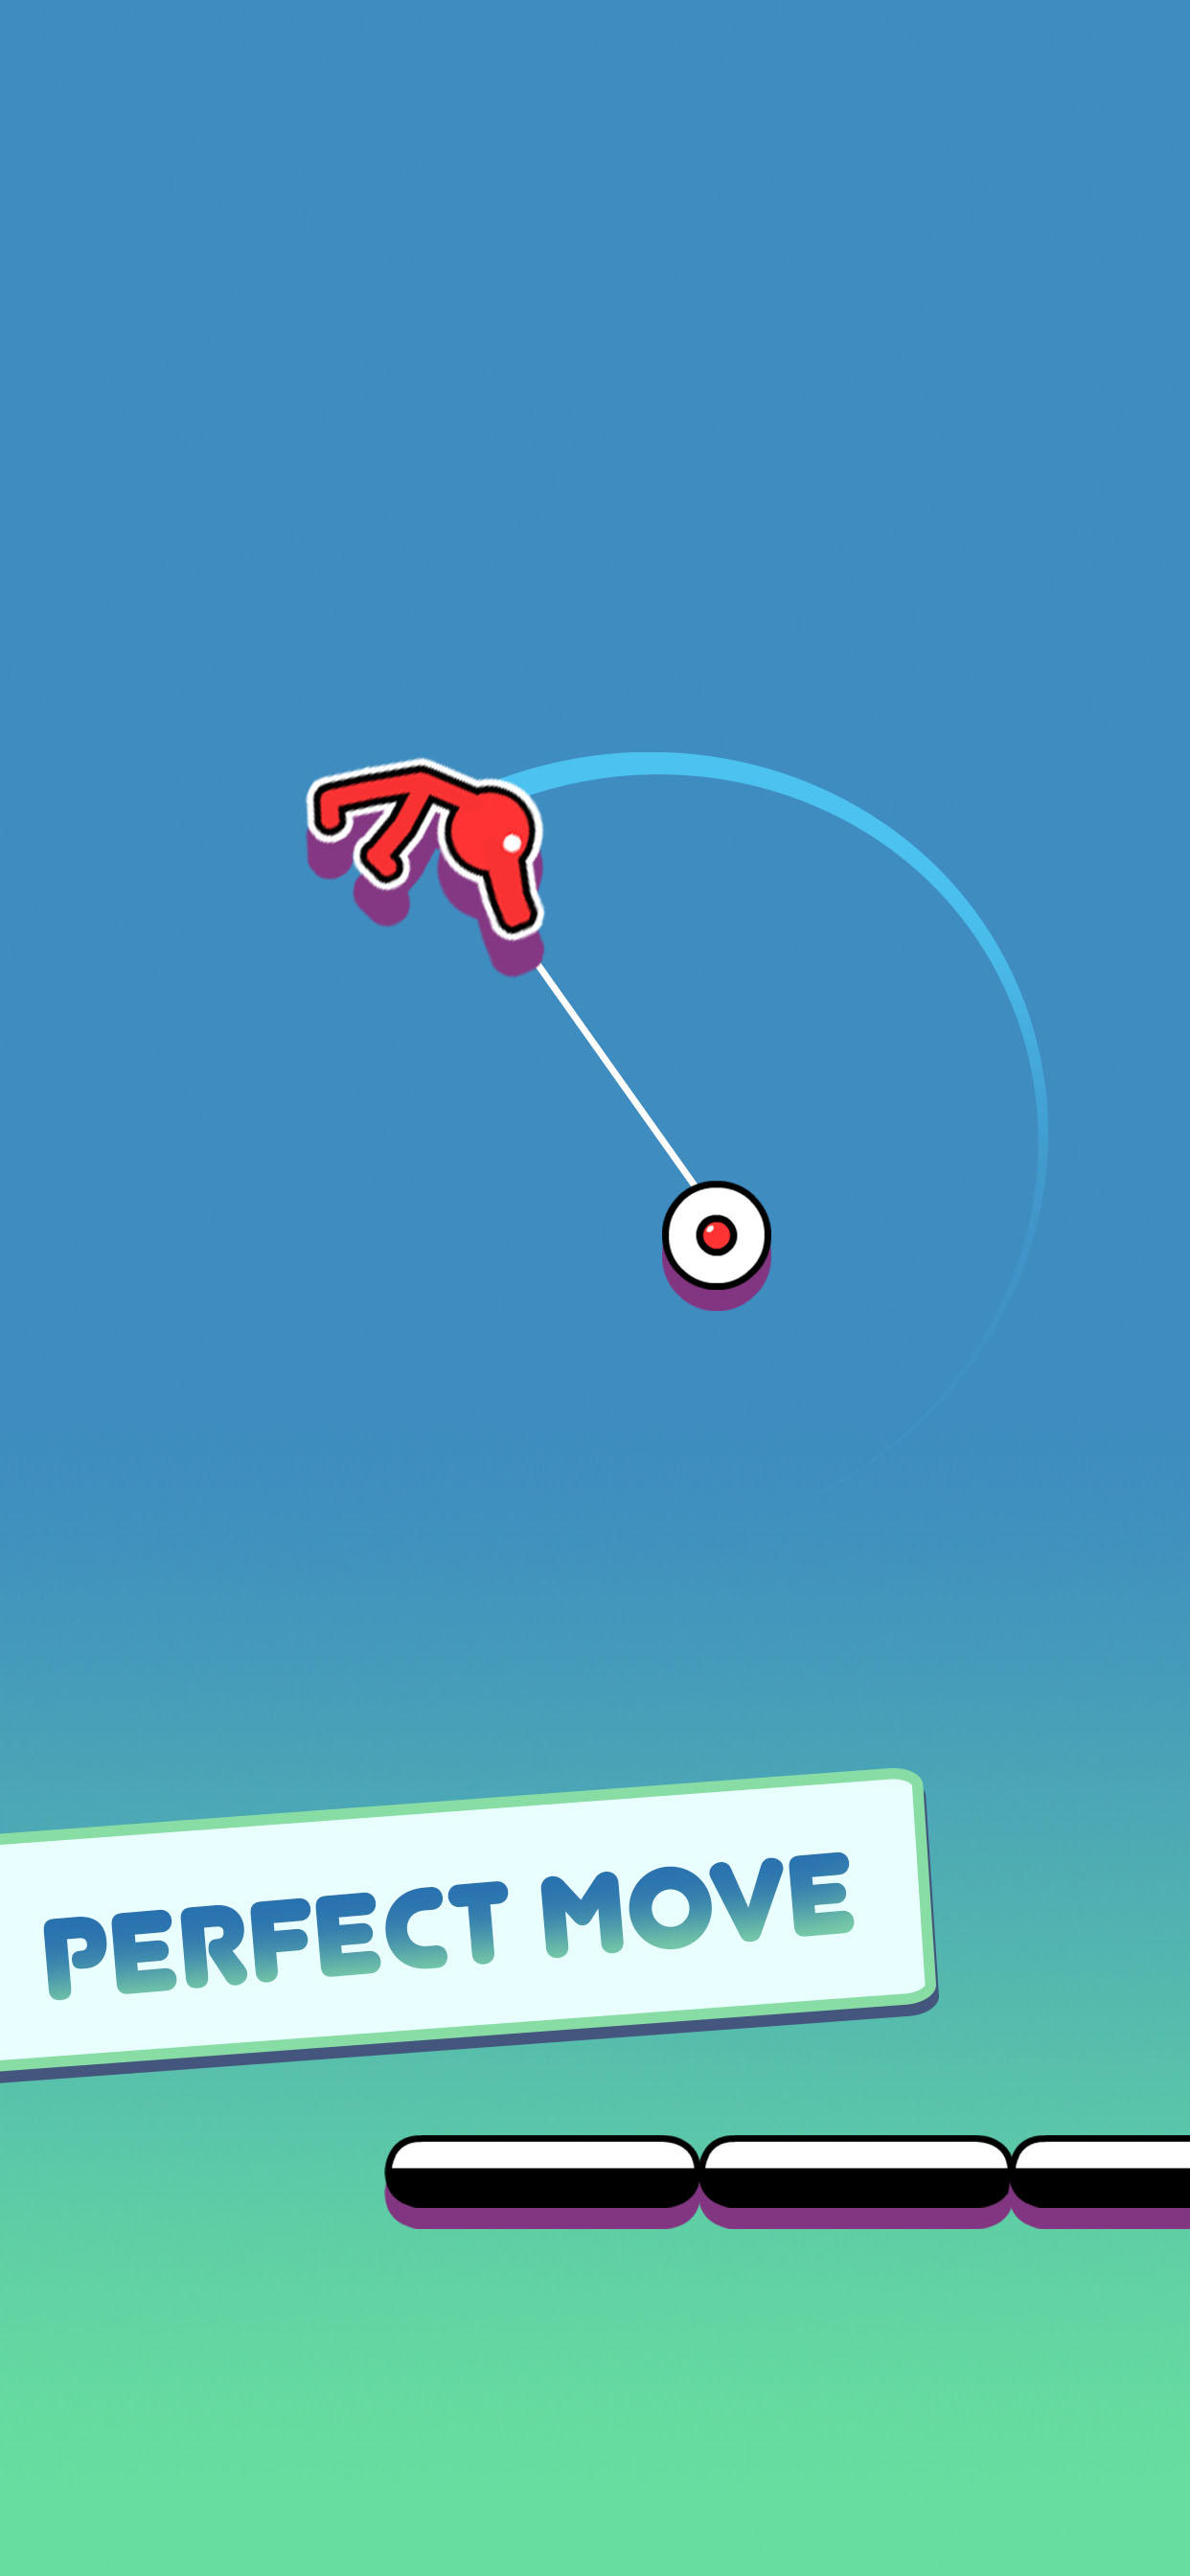 Stickman Hook for Android - Free App Download